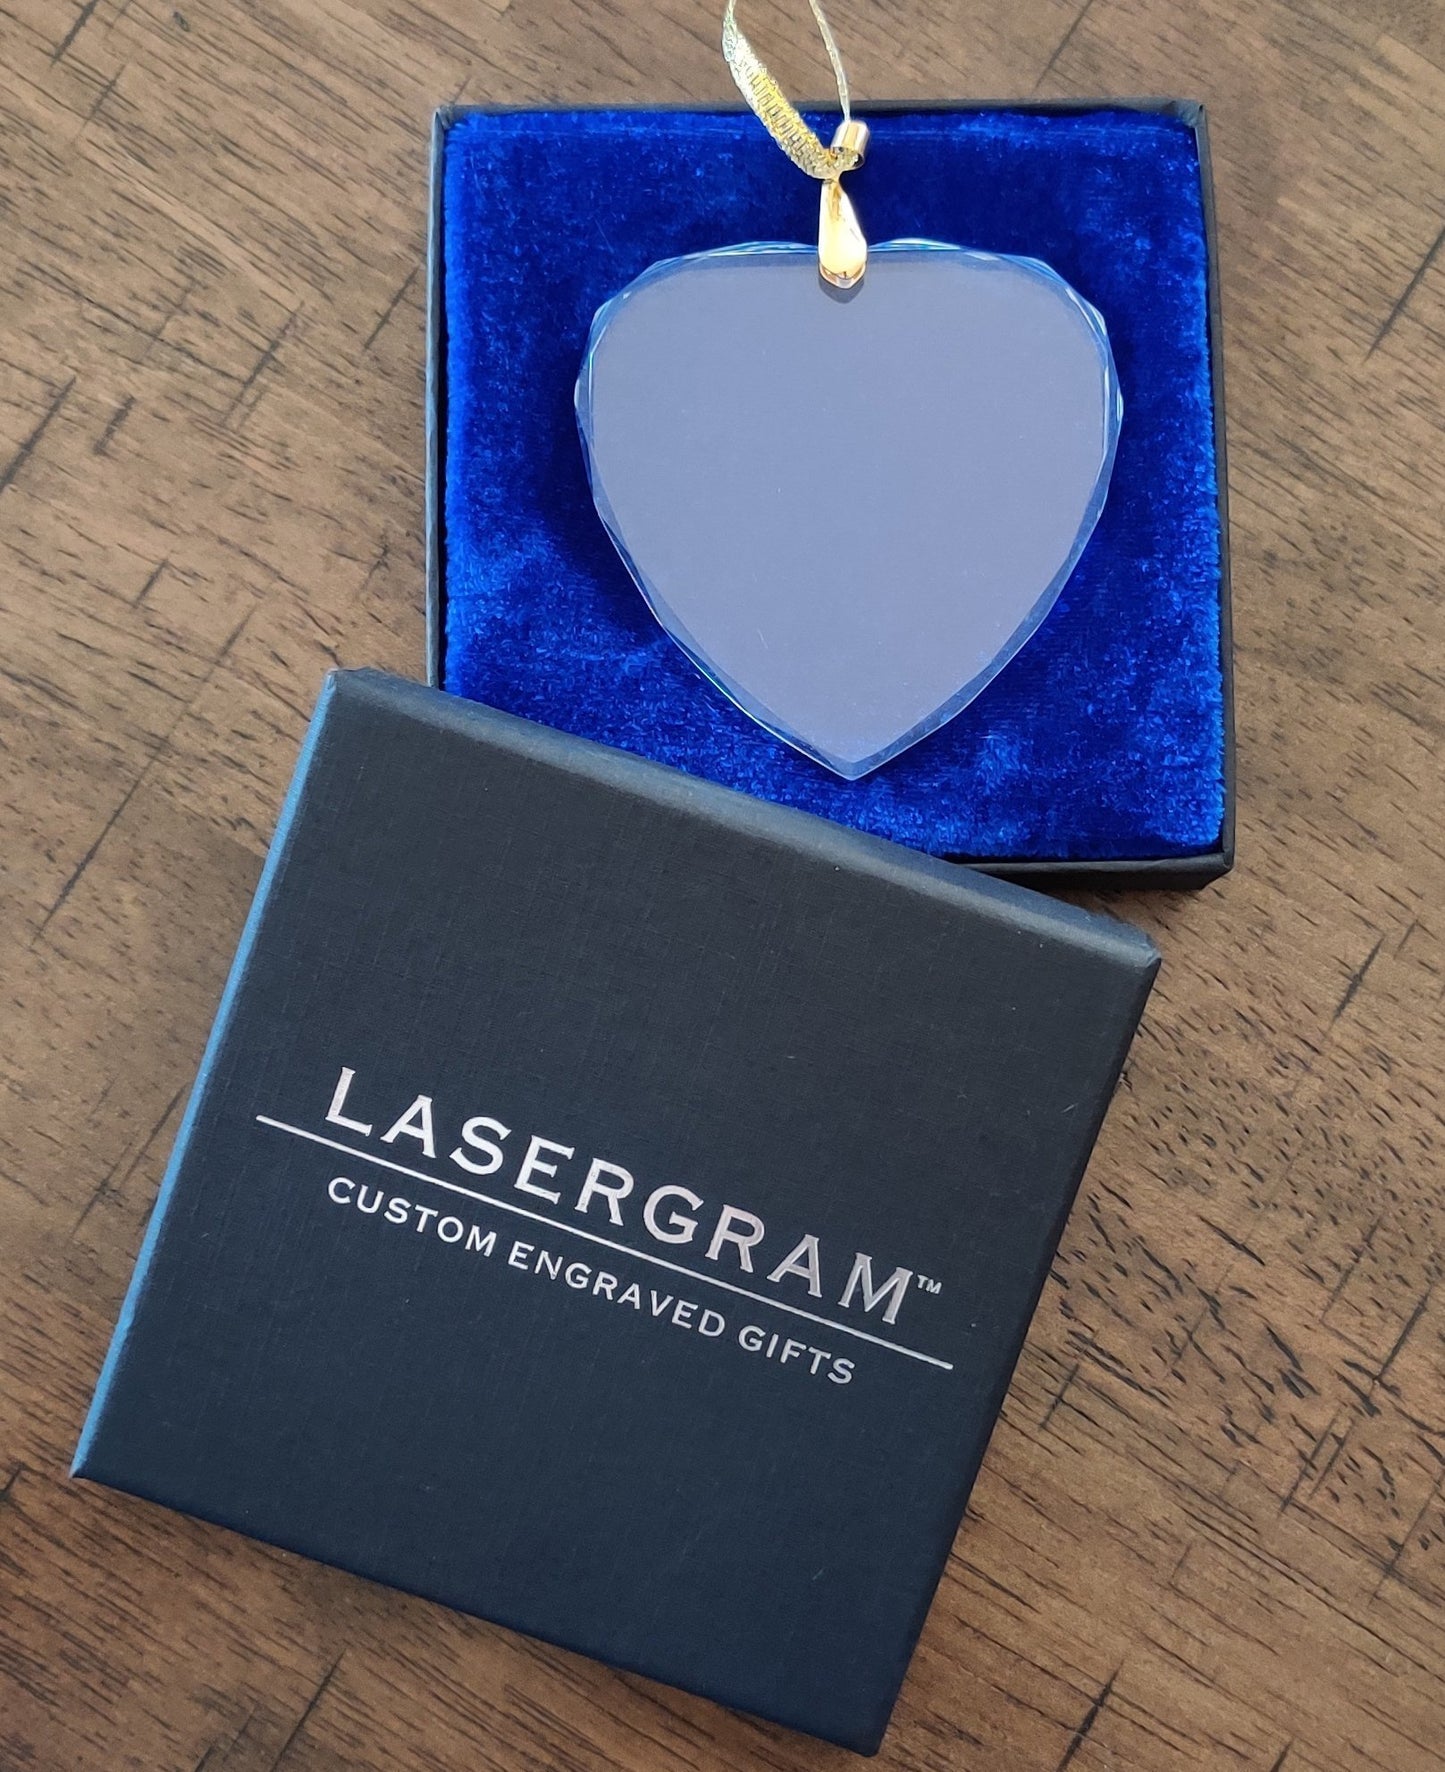 LaserGram Christmas Ornament, Class of 2020, 2021, 2022, 2023, 2024, 2025, Personalized Engraving Included (Heart Shape)